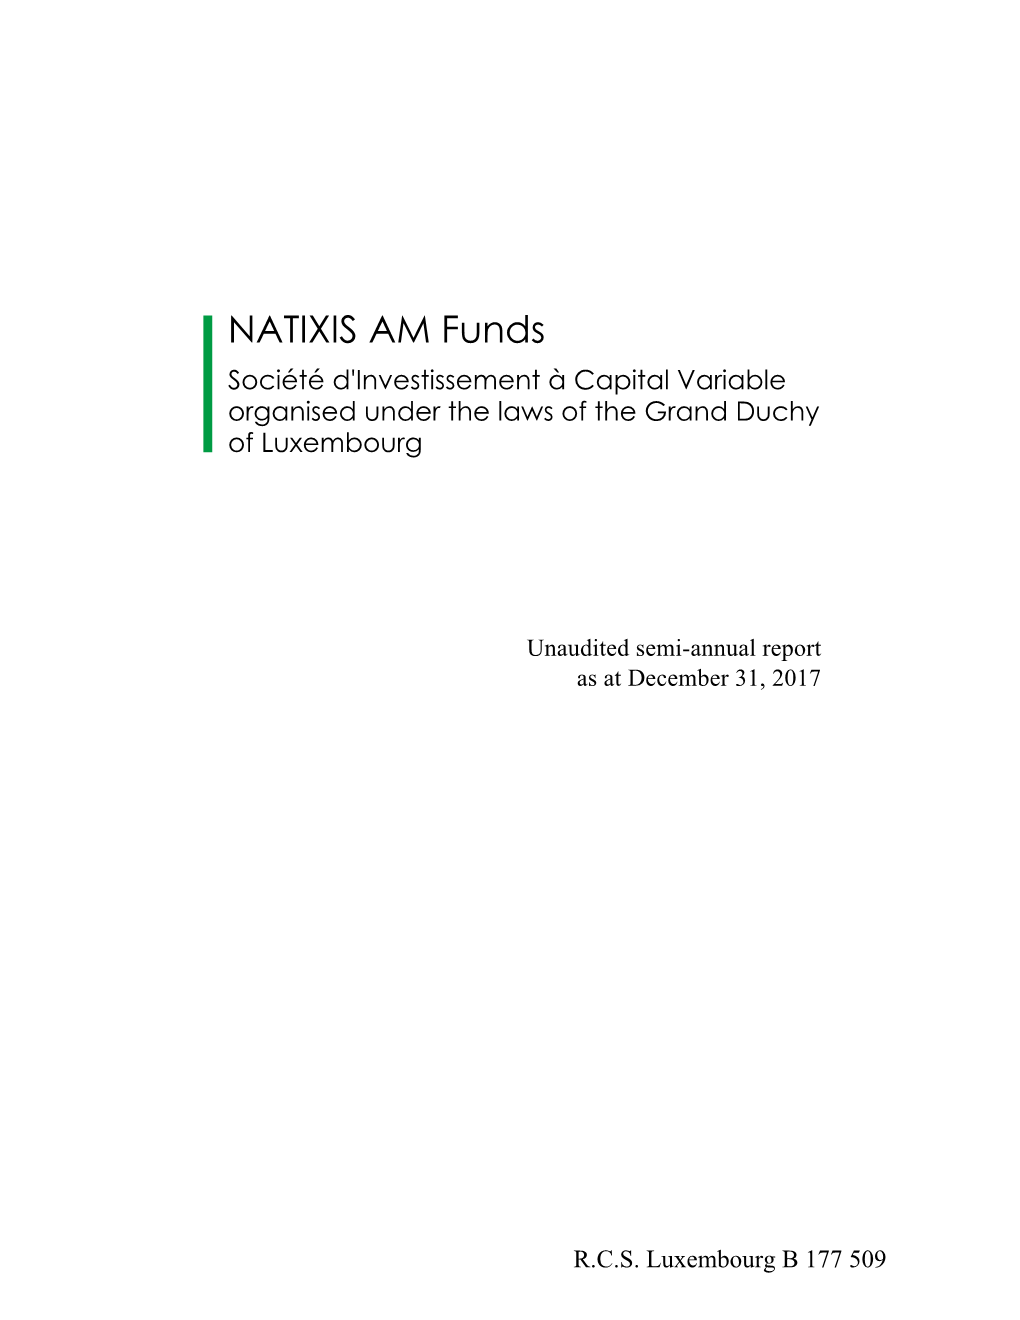 NATIXIS AM Funds